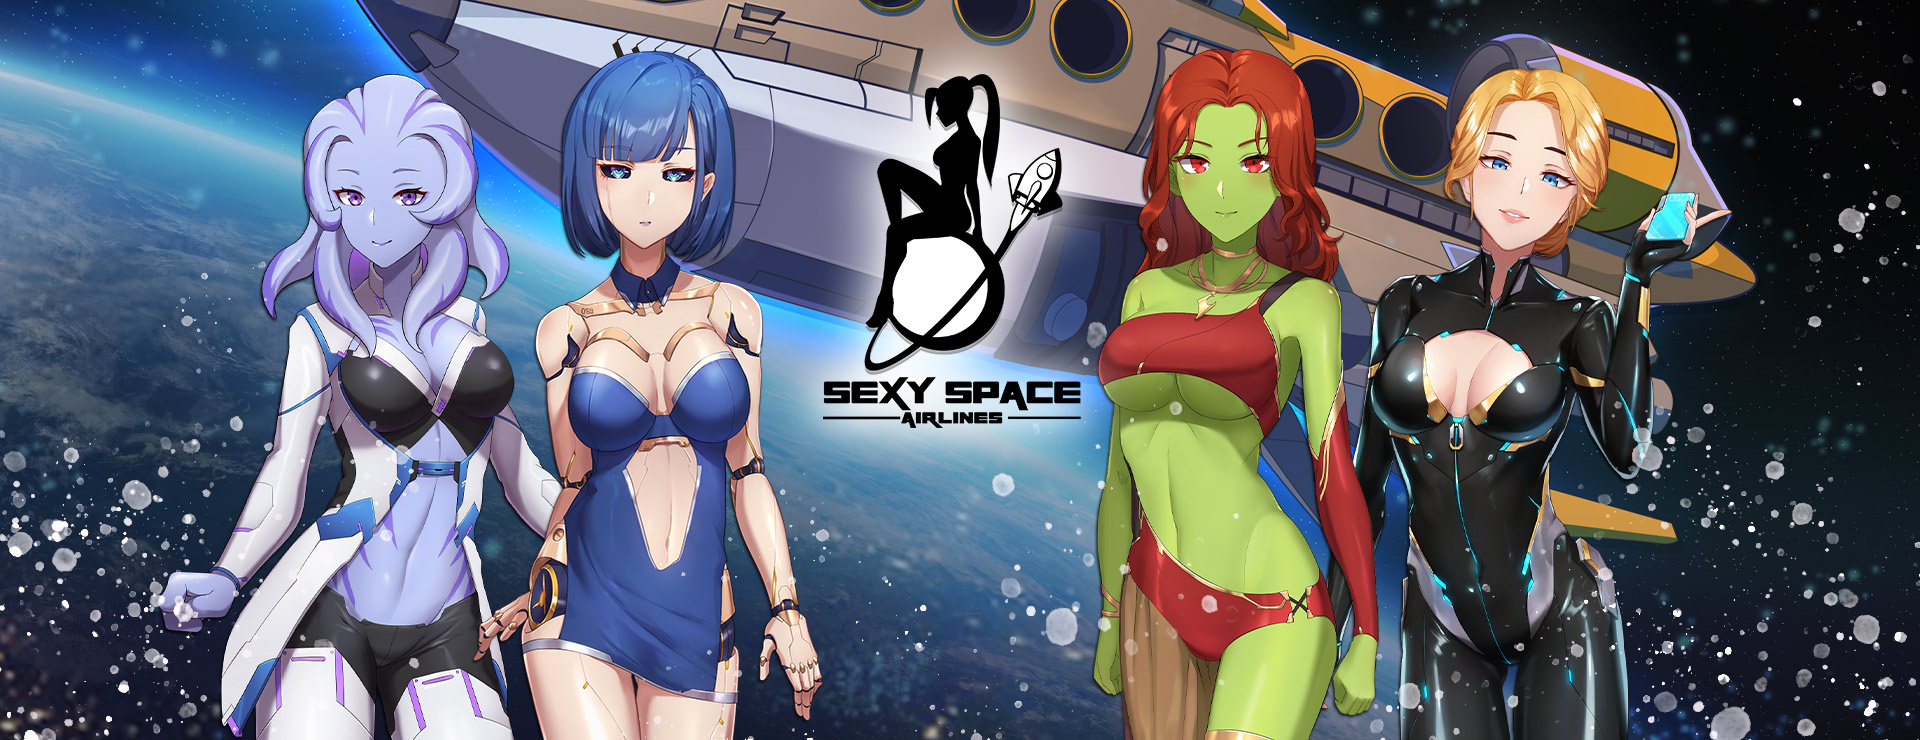 Sexy Space Airlines Game - Action Adventure Game